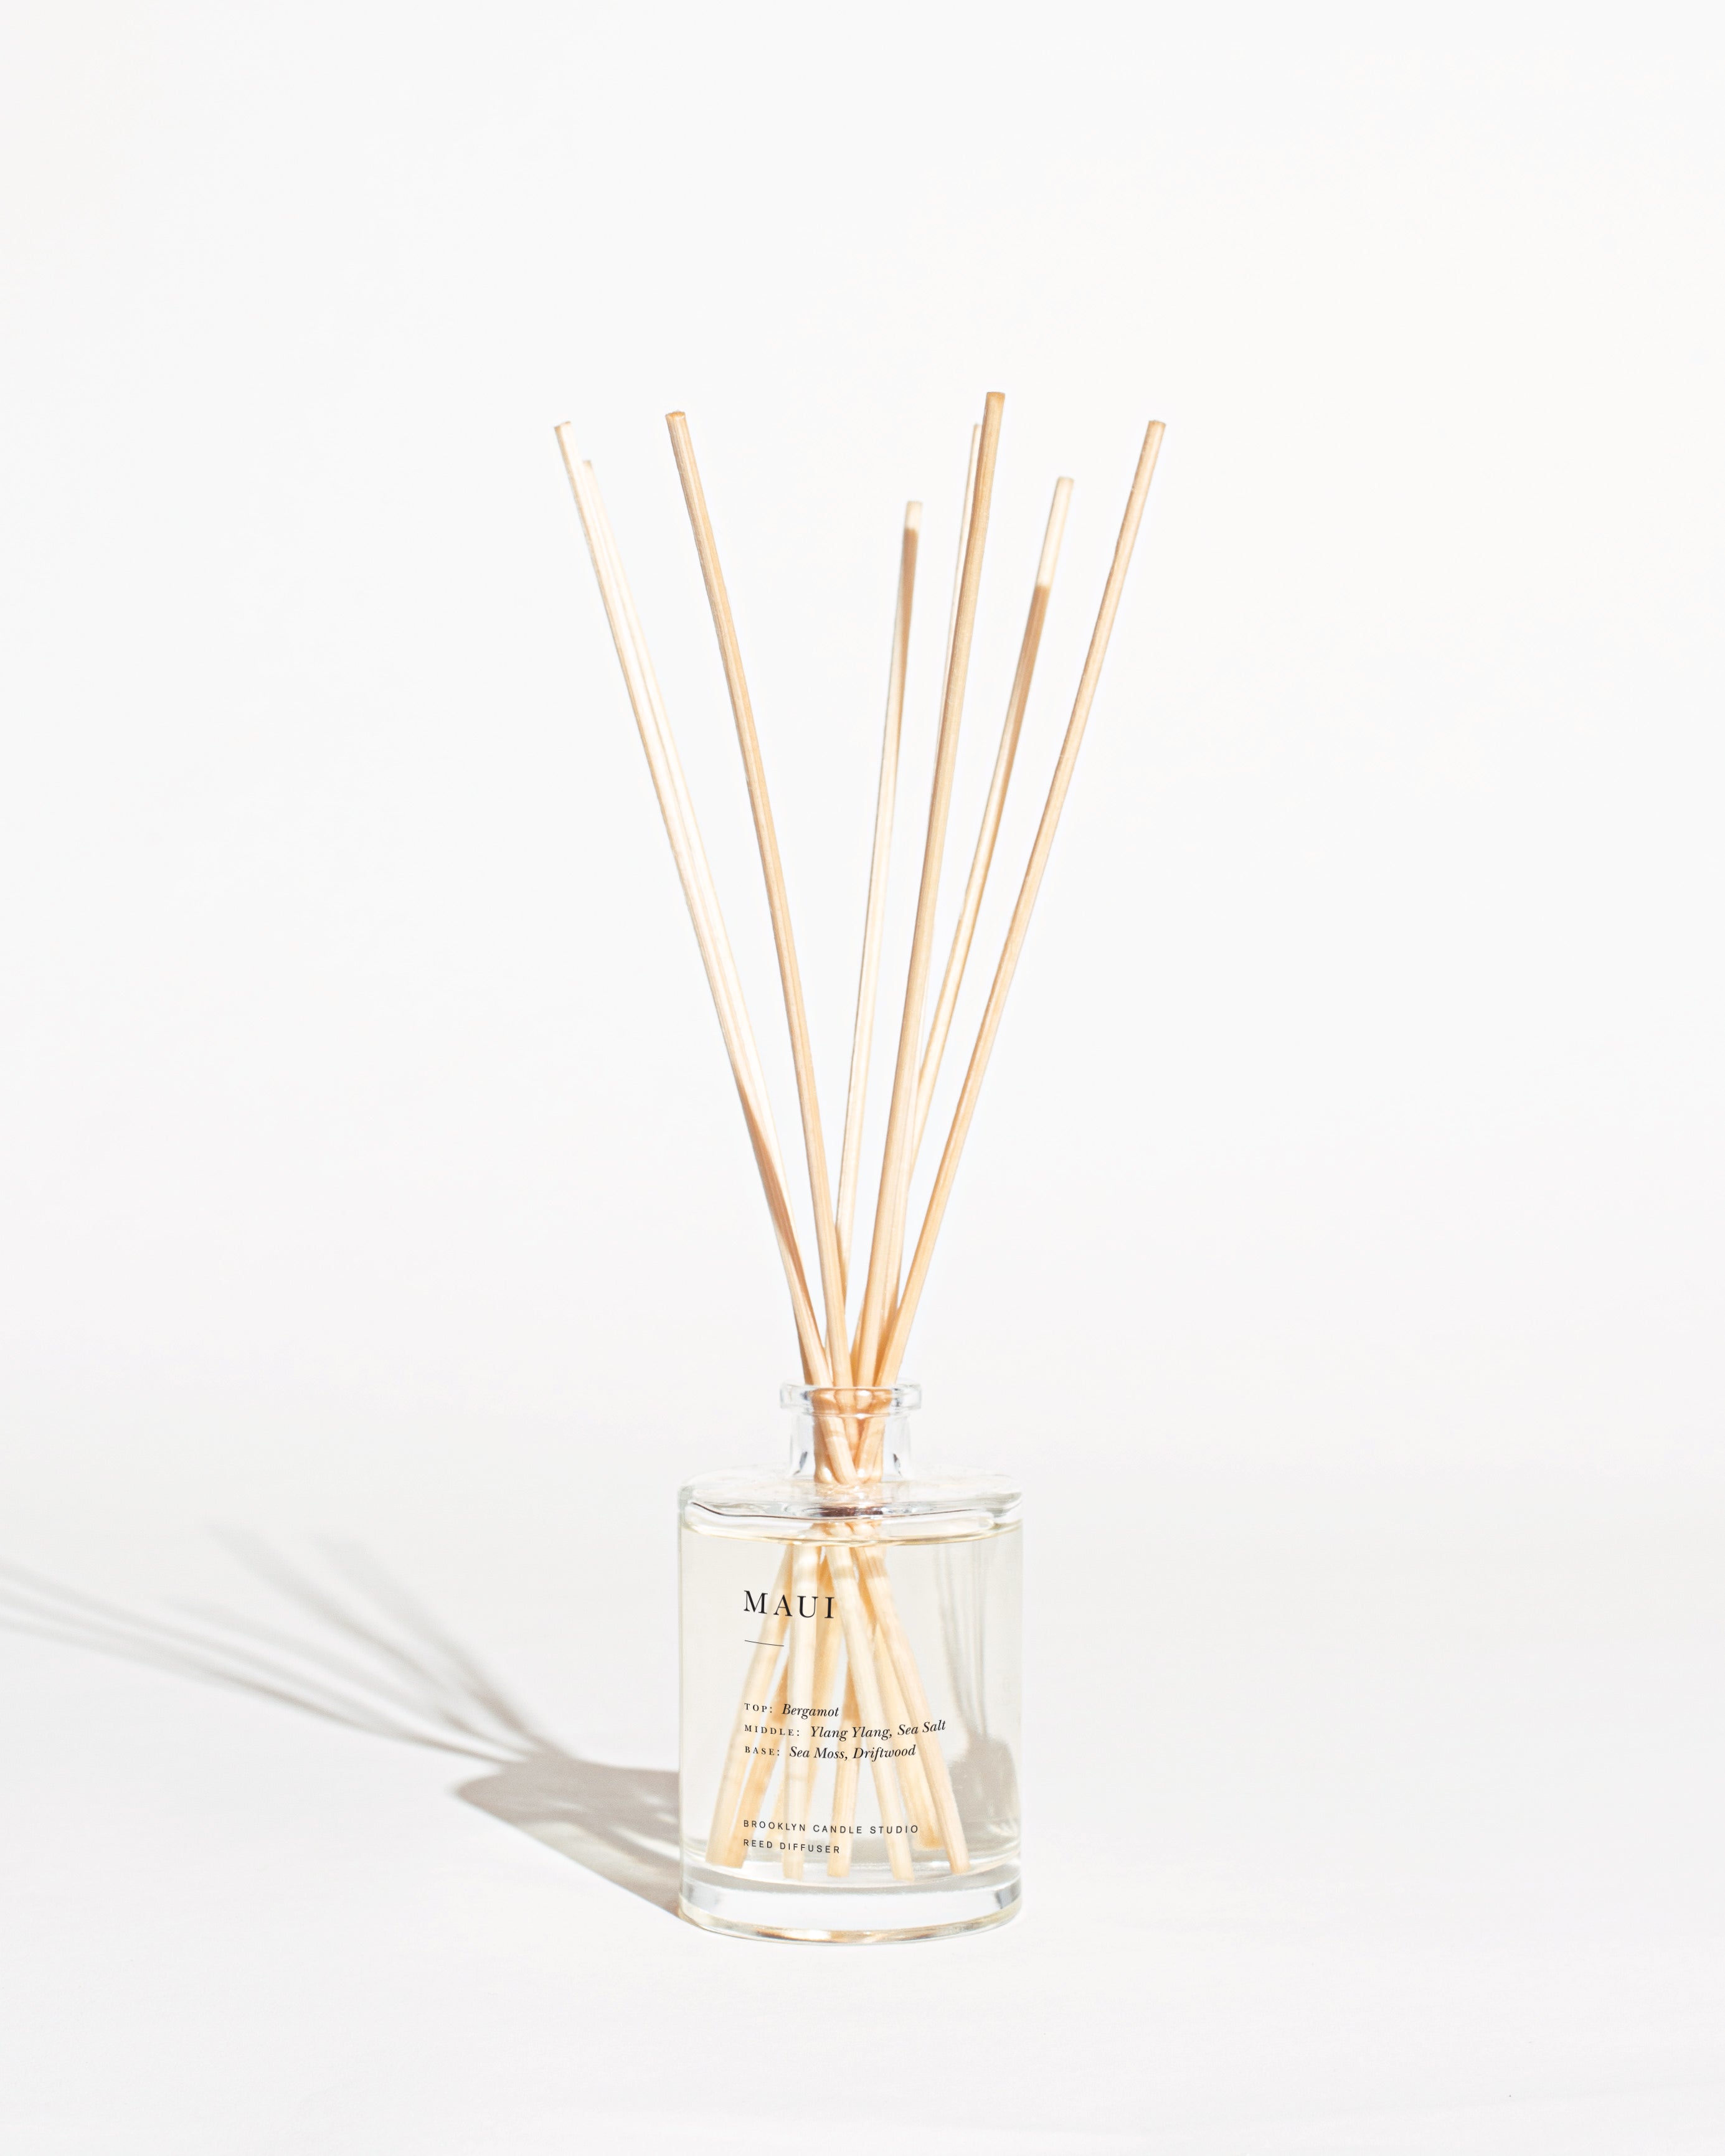 Maui Reed Diffuser Reed Diffusers Brooklyn Candle Studio 